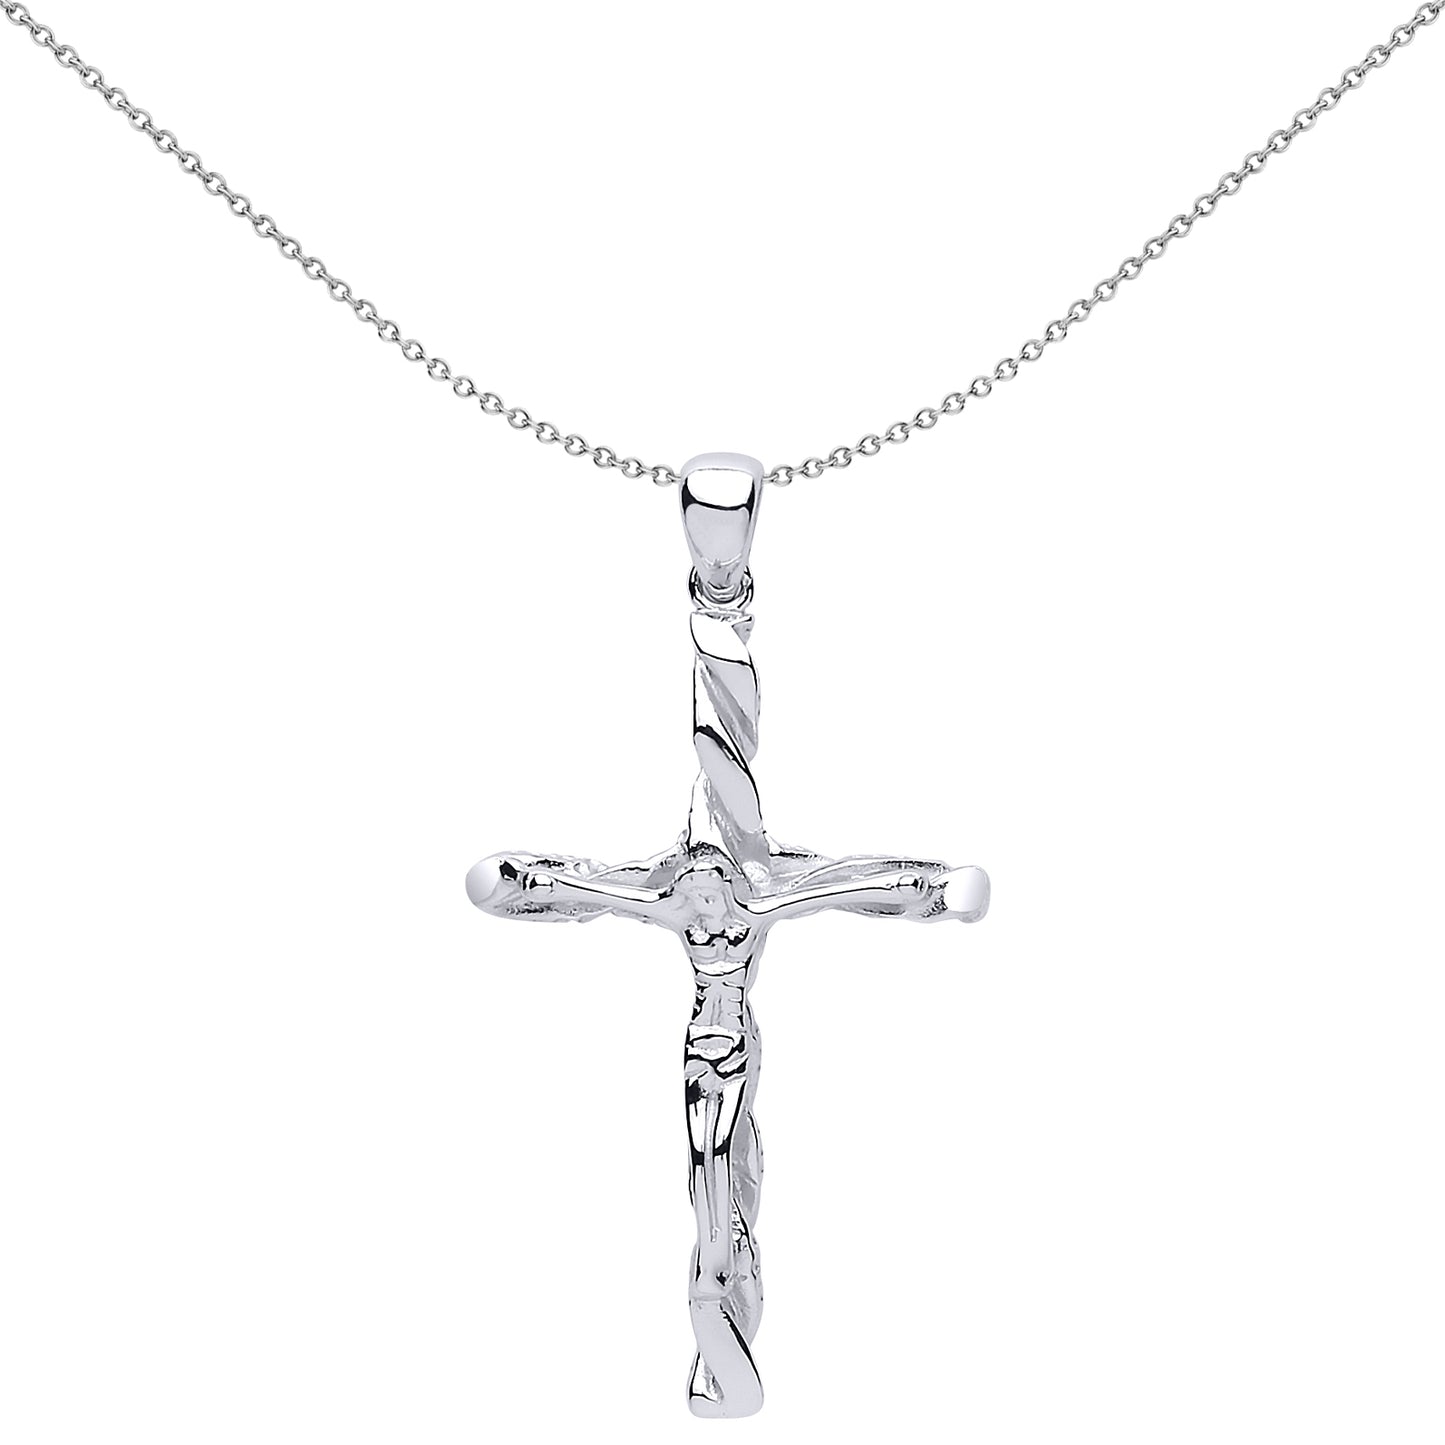 Silver  Twisted Crucifix Cross Pendant Necklace 18 inch - GVX038